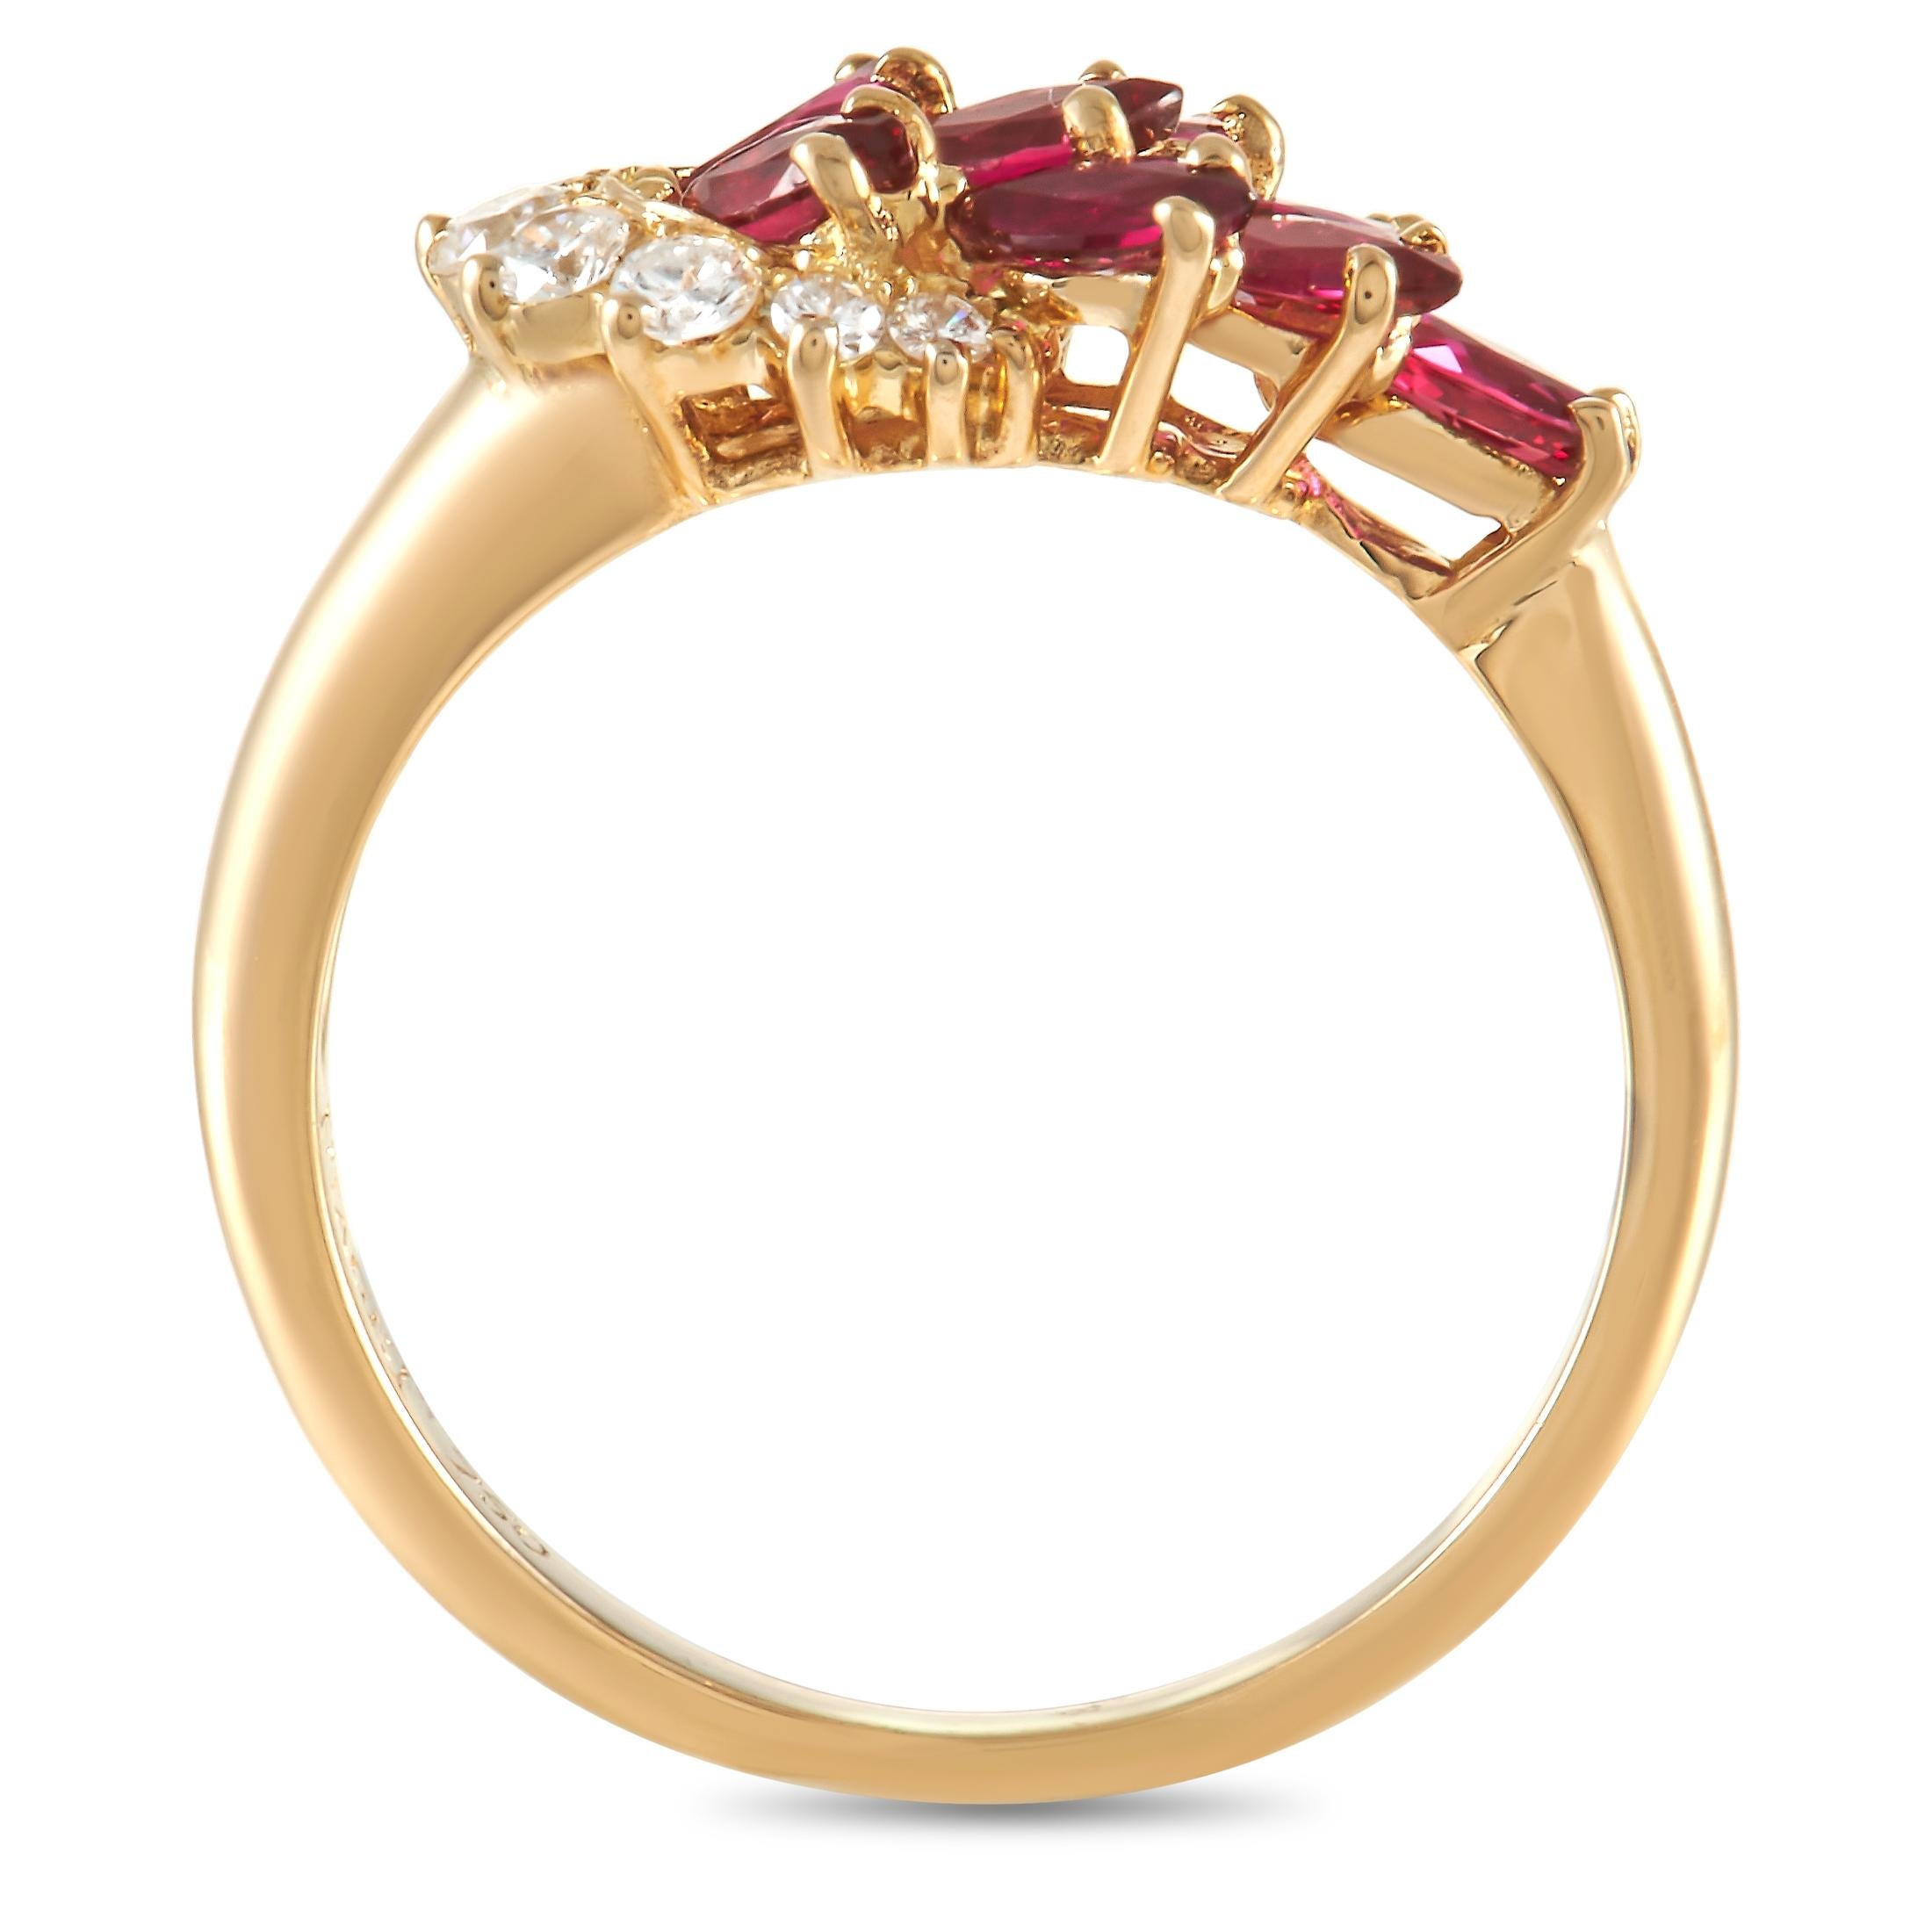 A stunning combination of rubies and diamonds make this Piaget ring impossible to ignore. Classically elegant in design, this piece’s 18K Yellow Gold setting features a 1mm wide band and a 5mm top height. 
 
 This jewelry piece is offered in estate